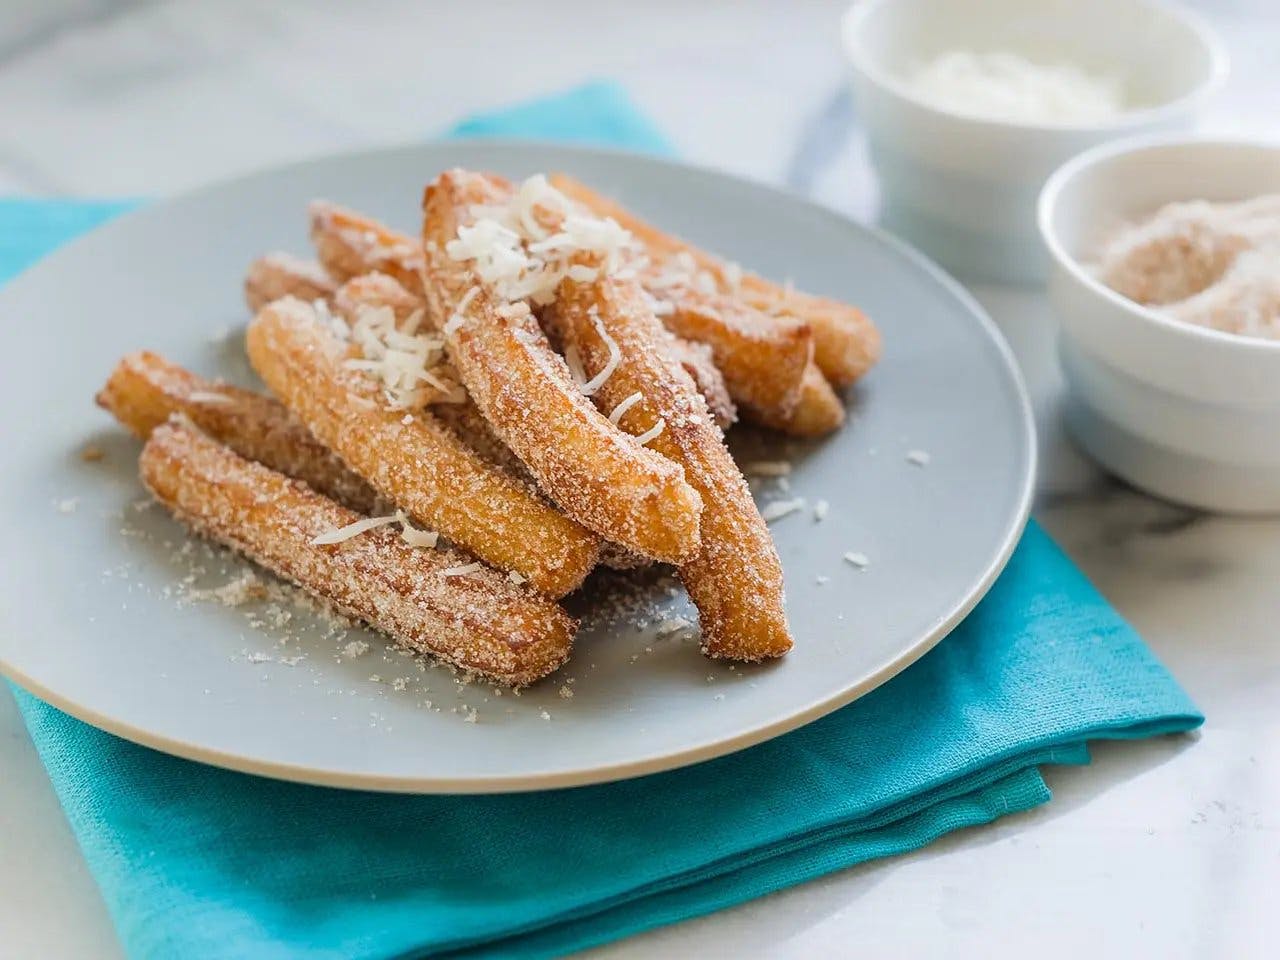 Close up of churros with cinnamon coconut sugar on plate.